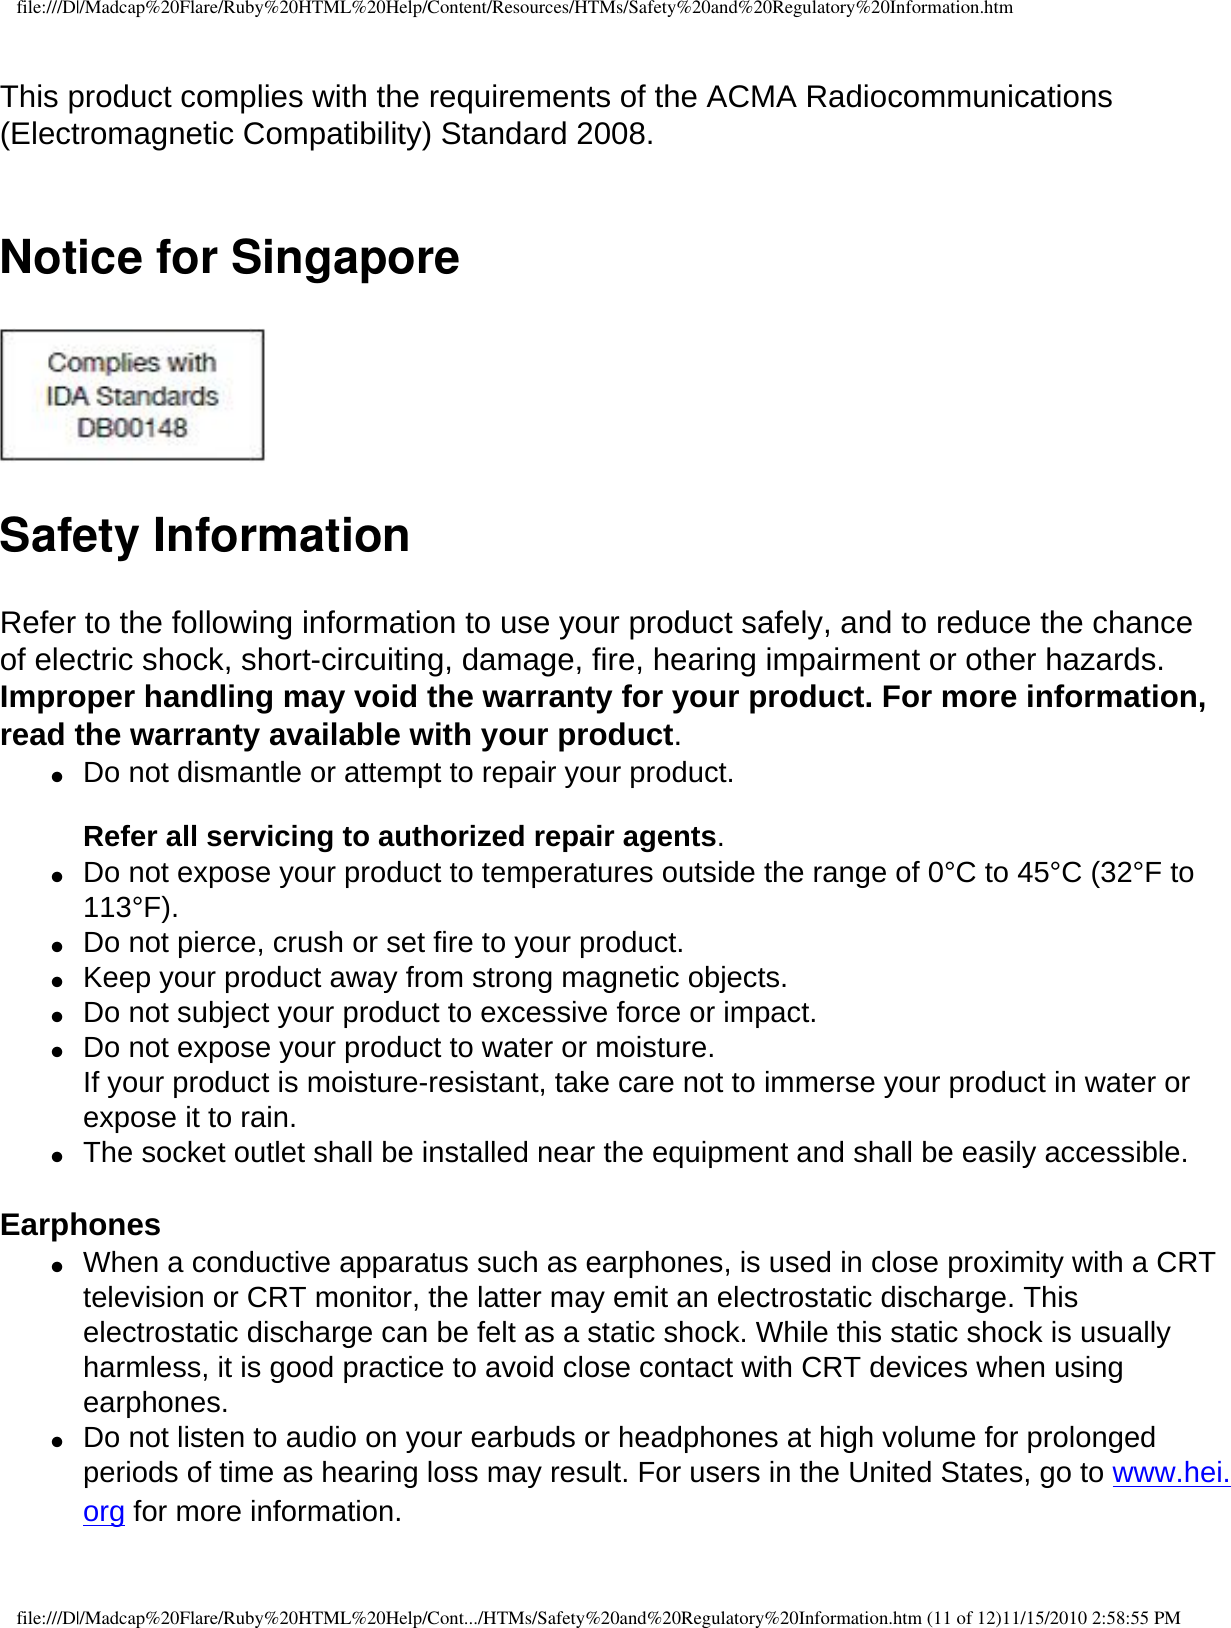 file:///D|/Madcap%20Flare/Ruby%20HTML%20Help/Content/Resources/HTMs/Safety%20and%20Regulatory%20Information.htm This product complies with the requirements of the ACMA Radiocommunications (Electromagnetic Compatibility) Standard 2008.  Notice for Singapore Safety InformationRefer to the following information to use your product safely, and to reduce the chance of electric shock, short-circuiting, damage, fire, hearing impairment or other hazards. Improper handling may void the warranty for your product. For more information, read the warranty available with your product.●     Do not dismantle or attempt to repair your product.   Refer all servicing to authorized repair agents. ●     Do not expose your product to temperatures outside the range of 0°C to 45°C (32°F to 113°F). ●     Do not pierce, crush or set fire to your product. ●     Keep your product away from strong magnetic objects. ●     Do not subject your product to excessive force or impact. ●     Do not expose your product to water or moisture.  If your product is moisture-resistant, take care not to immerse your product in water or expose it to rain.●     The socket outlet shall be installed near the equipment and shall be easily accessible. Earphones ●     When a conductive apparatus such as earphones, is used in close proximity with a CRT television or CRT monitor, the latter may emit an electrostatic discharge. This electrostatic discharge can be felt as a static shock. While this static shock is usually harmless, it is good practice to avoid close contact with CRT devices when using earphones. ●     Do not listen to audio on your earbuds or headphones at high volume for prolonged periods of time as hearing loss may result. For users in the United States, go to www.hei.org for more information.file:///D|/Madcap%20Flare/Ruby%20HTML%20Help/Cont.../HTMs/Safety%20and%20Regulatory%20Information.htm (11 of 12)11/15/2010 2:58:55 PM